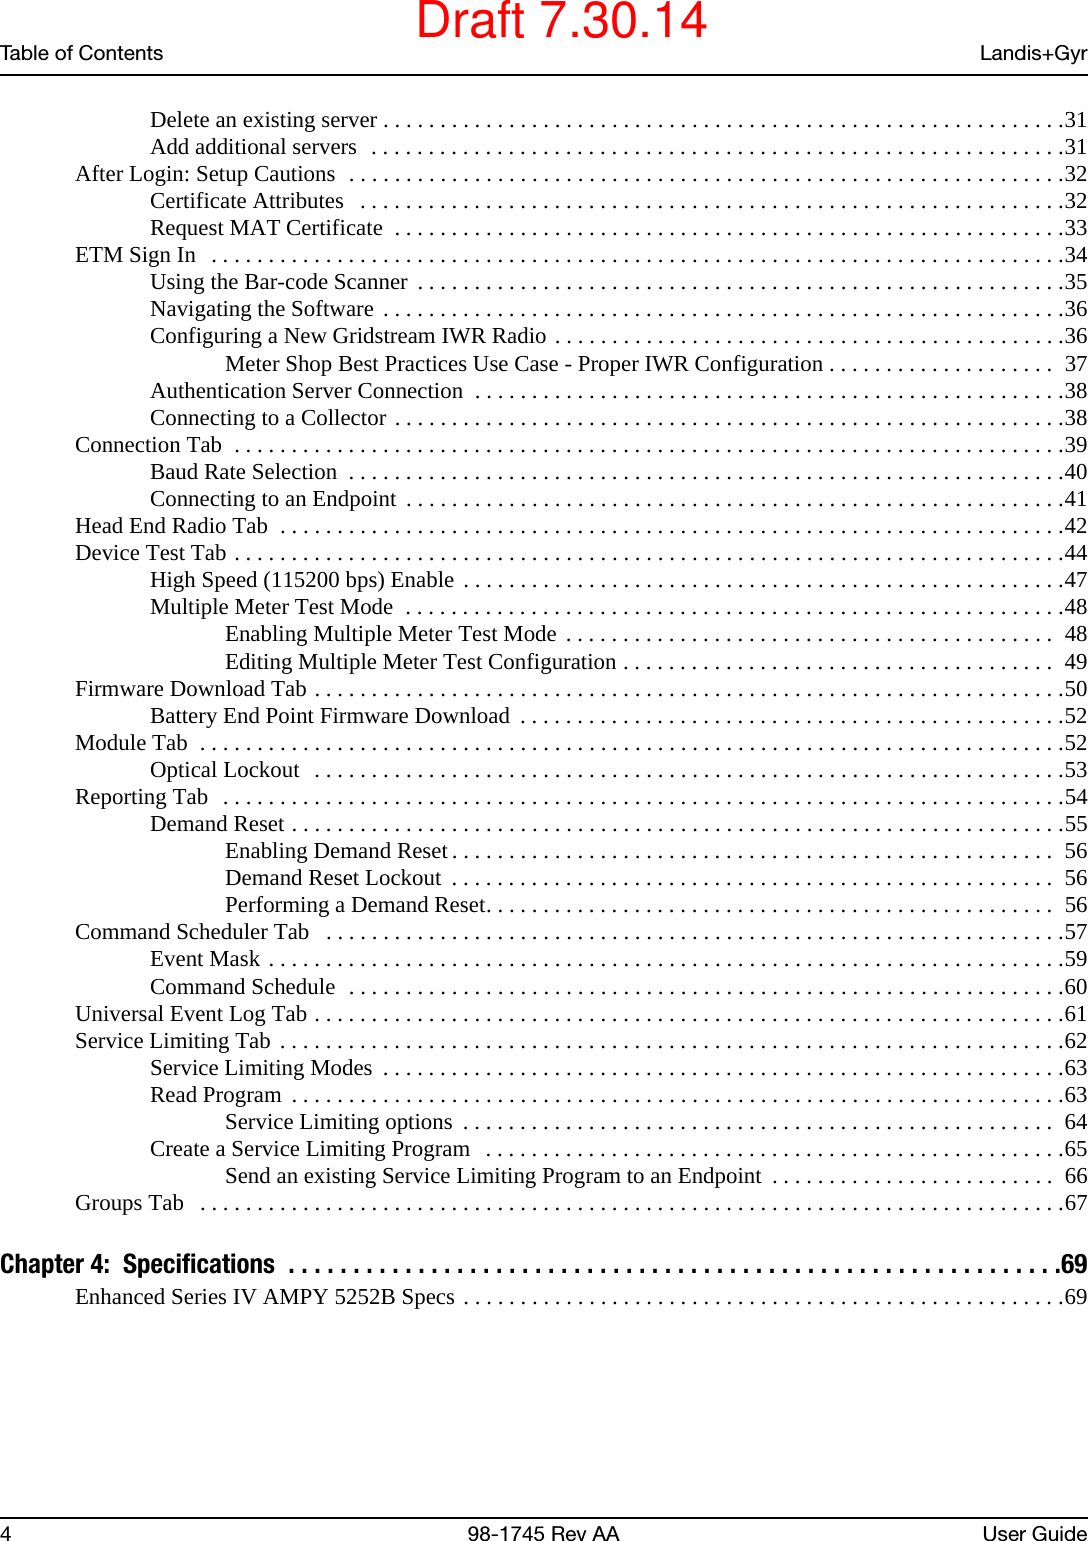 Table of Contents Landis+Gyr4 98-1745 Rev AA User GuideDelete an existing server . . . . . . . . . . . . . . . . . . . . . . . . . . . . . . . . . . . . . . . . . . . . . . . . . . . . . . . . . . . .31Add additional servers  . . . . . . . . . . . . . . . . . . . . . . . . . . . . . . . . . . . . . . . . . . . . . . . . . . . . . . . . . . . . .31After Login: Setup Cautions  . . . . . . . . . . . . . . . . . . . . . . . . . . . . . . . . . . . . . . . . . . . . . . . . . . . . . . . . . . . . . . .32Certificate Attributes   . . . . . . . . . . . . . . . . . . . . . . . . . . . . . . . . . . . . . . . . . . . . . . . . . . . . . . . . . . . . . .32Request MAT Certificate  . . . . . . . . . . . . . . . . . . . . . . . . . . . . . . . . . . . . . . . . . . . . . . . . . . . . . . . . . . .33ETM Sign In   . . . . . . . . . . . . . . . . . . . . . . . . . . . . . . . . . . . . . . . . . . . . . . . . . . . . . . . . . . . . . . . . . . . . . . . . . . .34Using the Bar-code Scanner  . . . . . . . . . . . . . . . . . . . . . . . . . . . . . . . . . . . . . . . . . . . . . . . . . . . . . . . . .35Navigating the Software . . . . . . . . . . . . . . . . . . . . . . . . . . . . . . . . . . . . . . . . . . . . . . . . . . . . . . . . . . . .36Configuring a New Gridstream IWR Radio . . . . . . . . . . . . . . . . . . . . . . . . . . . . . . . . . . . . . . . . . . . . .36Meter Shop Best Practices Use Case - Proper IWR Configuration . . . . . . . . . . . . . . . . . . . .  37Authentication Server Connection  . . . . . . . . . . . . . . . . . . . . . . . . . . . . . . . . . . . . . . . . . . . . . . . . . . . .38Connecting to a Collector . . . . . . . . . . . . . . . . . . . . . . . . . . . . . . . . . . . . . . . . . . . . . . . . . . . . . . . . . . .38Connection Tab  . . . . . . . . . . . . . . . . . . . . . . . . . . . . . . . . . . . . . . . . . . . . . . . . . . . . . . . . . . . . . . . . . . . . . . . . .39Baud Rate Selection  . . . . . . . . . . . . . . . . . . . . . . . . . . . . . . . . . . . . . . . . . . . . . . . . . . . . . . . . . . . . . . .40Connecting to an Endpoint  . . . . . . . . . . . . . . . . . . . . . . . . . . . . . . . . . . . . . . . . . . . . . . . . . . . . . . . . . .41Head End Radio Tab  . . . . . . . . . . . . . . . . . . . . . . . . . . . . . . . . . . . . . . . . . . . . . . . . . . . . . . . . . . . . . . . . . . . . .42Device Test Tab . . . . . . . . . . . . . . . . . . . . . . . . . . . . . . . . . . . . . . . . . . . . . . . . . . . . . . . . . . . . . . . . . . . . . . . . .44High Speed (115200 bps) Enable . . . . . . . . . . . . . . . . . . . . . . . . . . . . . . . . . . . . . . . . . . . . . . . . . . . . .47Multiple Meter Test Mode  . . . . . . . . . . . . . . . . . . . . . . . . . . . . . . . . . . . . . . . . . . . . . . . . . . . . . . . . . .48Enabling Multiple Meter Test Mode . . . . . . . . . . . . . . . . . . . . . . . . . . . . . . . . . . . . . . . . . . .  48Editing Multiple Meter Test Configuration . . . . . . . . . . . . . . . . . . . . . . . . . . . . . . . . . . . . . .  49Firmware Download Tab . . . . . . . . . . . . . . . . . . . . . . . . . . . . . . . . . . . . . . . . . . . . . . . . . . . . . . . . . . . . . . . . . .50Battery End Point Firmware Download  . . . . . . . . . . . . . . . . . . . . . . . . . . . . . . . . . . . . . . . . . . . . . . . .52Module Tab  . . . . . . . . . . . . . . . . . . . . . . . . . . . . . . . . . . . . . . . . . . . . . . . . . . . . . . . . . . . . . . . . . . . . . . . . . . . .52Optical Lockout  . . . . . . . . . . . . . . . . . . . . . . . . . . . . . . . . . . . . . . . . . . . . . . . . . . . . . . . . . . . . . . . . . .53Reporting Tab  . . . . . . . . . . . . . . . . . . . . . . . . . . . . . . . . . . . . . . . . . . . . . . . . . . . . . . . . . . . . . . . . . . . . . . . . . .54Demand Reset . . . . . . . . . . . . . . . . . . . . . . . . . . . . . . . . . . . . . . . . . . . . . . . . . . . . . . . . . . . . . . . . . . . .55Enabling Demand Reset . . . . . . . . . . . . . . . . . . . . . . . . . . . . . . . . . . . . . . . . . . . . . . . . . . . . .  56Demand Reset Lockout  . . . . . . . . . . . . . . . . . . . . . . . . . . . . . . . . . . . . . . . . . . . . . . . . . . . . .  56Performing a Demand Reset. . . . . . . . . . . . . . . . . . . . . . . . . . . . . . . . . . . . . . . . . . . . . . . . . .  56Command Scheduler Tab   . . . . . . . . . . . . . . . . . . . . . . . . . . . . . . . . . . . . . . . . . . . . . . . . . . . . . . . . . . . . . . . . .57Event Mask . . . . . . . . . . . . . . . . . . . . . . . . . . . . . . . . . . . . . . . . . . . . . . . . . . . . . . . . . . . . . . . . . . . . . .59Command Schedule  . . . . . . . . . . . . . . . . . . . . . . . . . . . . . . . . . . . . . . . . . . . . . . . . . . . . . . . . . . . . . . .60Universal Event Log Tab . . . . . . . . . . . . . . . . . . . . . . . . . . . . . . . . . . . . . . . . . . . . . . . . . . . . . . . . . . . . . . . . . .61Service Limiting Tab . . . . . . . . . . . . . . . . . . . . . . . . . . . . . . . . . . . . . . . . . . . . . . . . . . . . . . . . . . . . . . . . . . . . .62Service Limiting Modes  . . . . . . . . . . . . . . . . . . . . . . . . . . . . . . . . . . . . . . . . . . . . . . . . . . . . . . . . . . . .63Read Program  . . . . . . . . . . . . . . . . . . . . . . . . . . . . . . . . . . . . . . . . . . . . . . . . . . . . . . . . . . . . . . . . . . . .63Service Limiting options  . . . . . . . . . . . . . . . . . . . . . . . . . . . . . . . . . . . . . . . . . . . . . . . . . . . .  64Create a Service Limiting Program  . . . . . . . . . . . . . . . . . . . . . . . . . . . . . . . . . . . . . . . . . . . . . . . . . . .65Send an existing Service Limiting Program to an Endpoint  . . . . . . . . . . . . . . . . . . . . . . . . .  66Groups Tab   . . . . . . . . . . . . . . . . . . . . . . . . . . . . . . . . . . . . . . . . . . . . . . . . . . . . . . . . . . . . . . . . . . . . . . . . . . . .67Chapter 4:  Specifications  . . . . . . . . . . . . . . . . . . . . . . . . . . . . . . . . . . . . . . . . . . . . . . . . . . . . . . . . . . . .69Enhanced Series IV AMPY 5252B Specs . . . . . . . . . . . . . . . . . . . . . . . . . . . . . . . . . . . . . . . . . . . . . . . . . . . . .69Draft 7.30.14